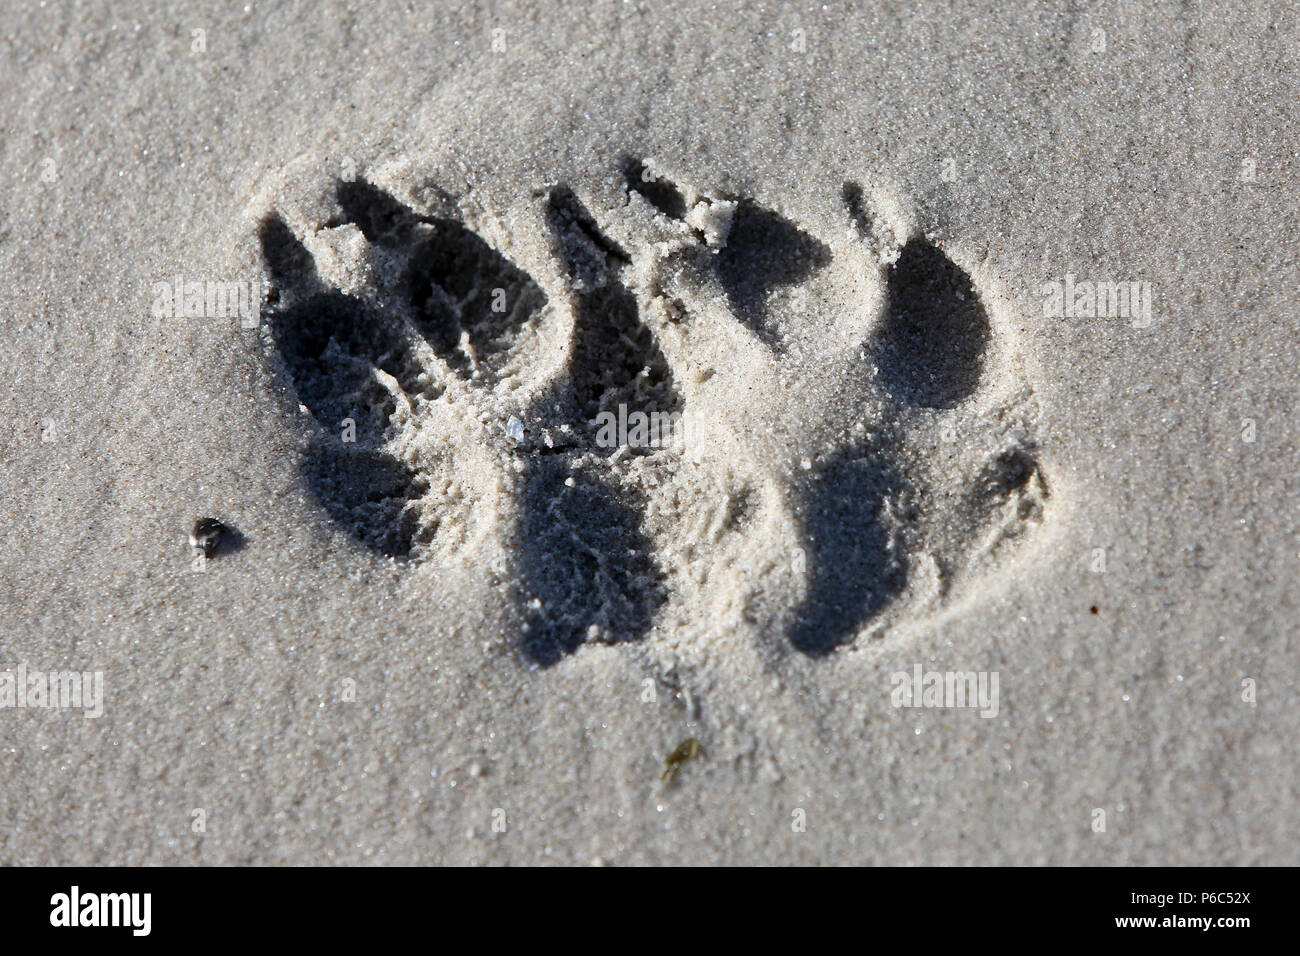 Wustrow, Germany - imprint of two dog paws in the sand Stock Photo